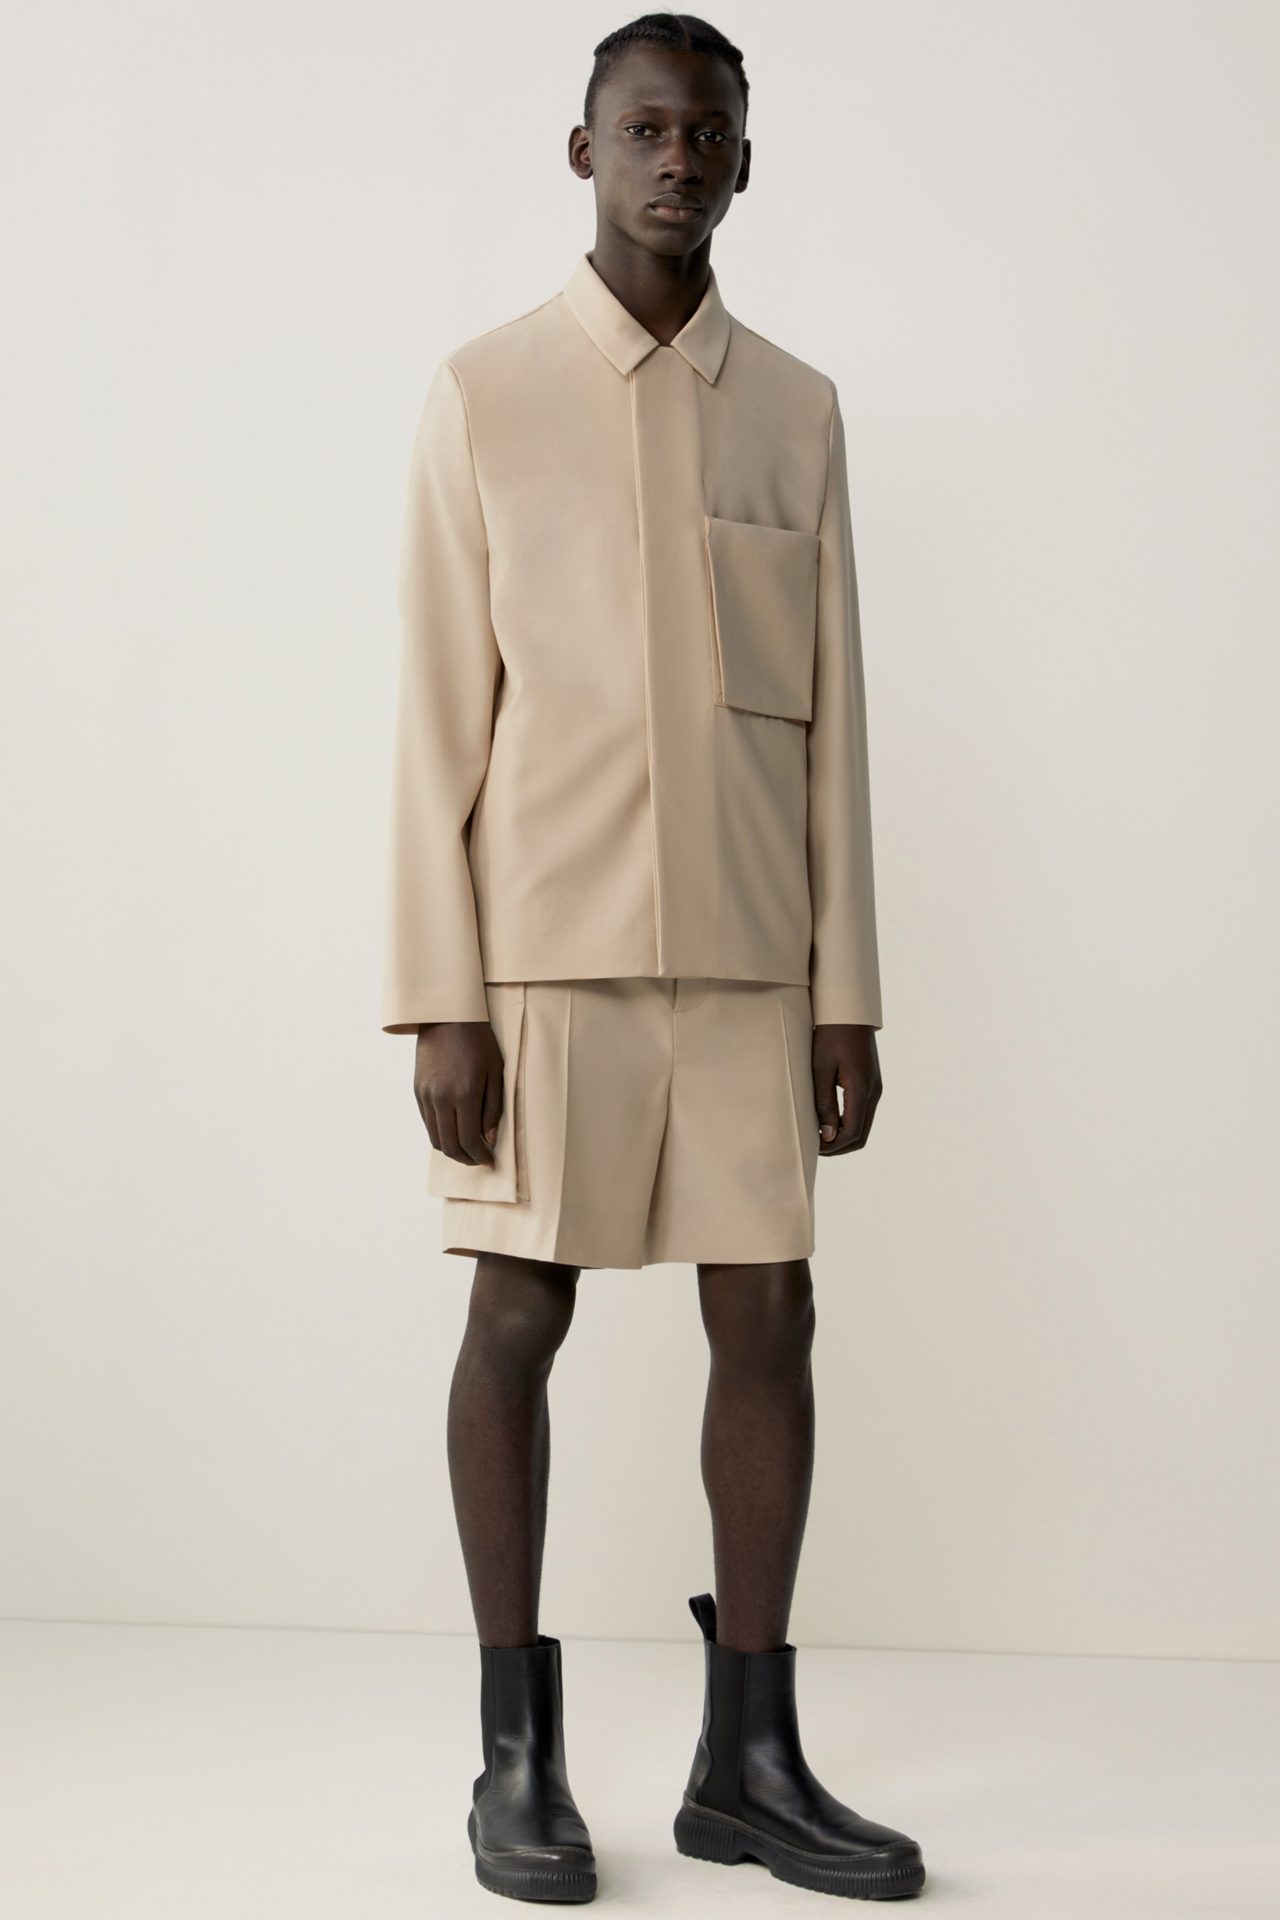 COS Explores Responsibly-Sourced Fabrics for Its Fall Ready-to